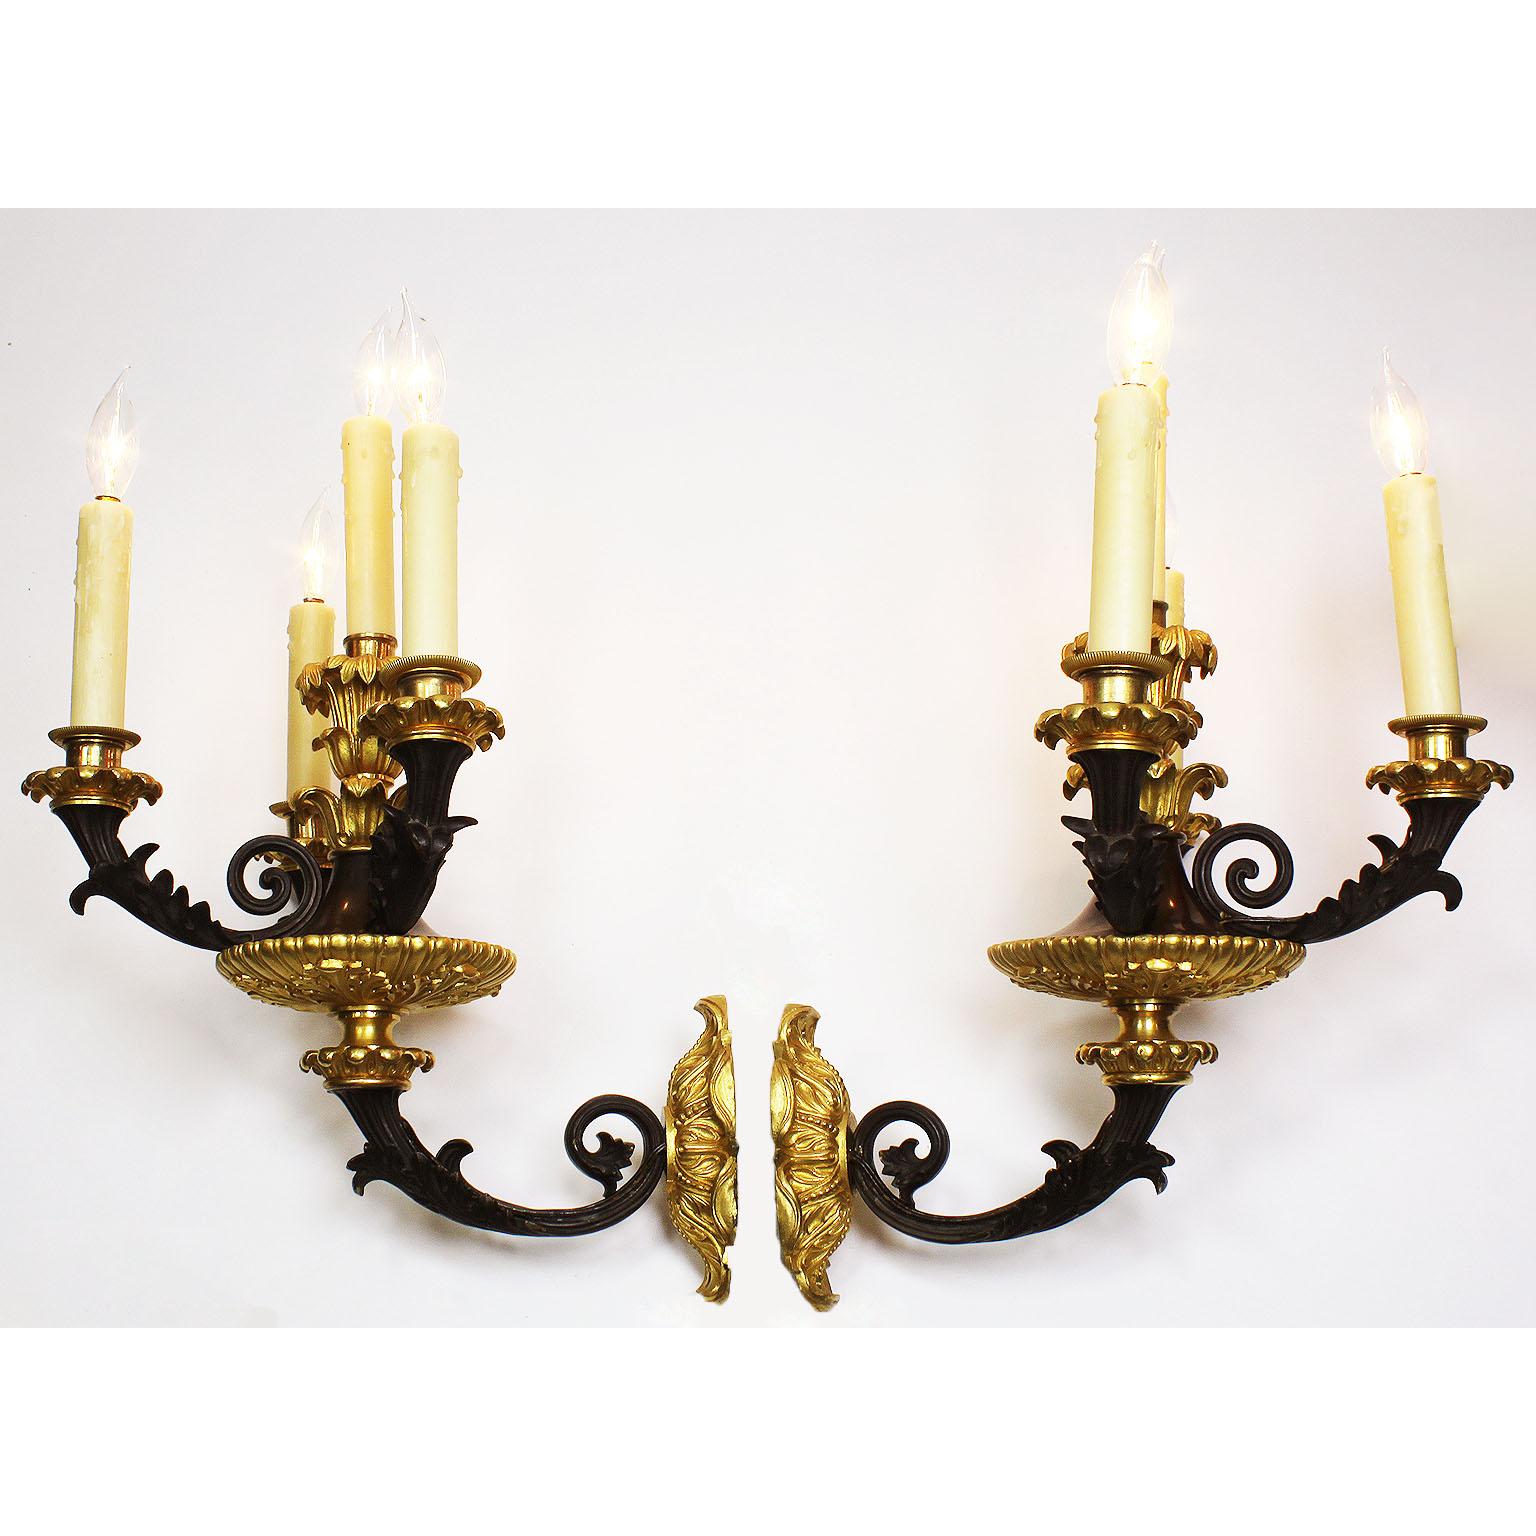 A fine pair of French 19th century neoclassical empire revival style gilt and patinated bronze four-light wall sconces (wall lights). The ornately chased bronze candle-arms with an acanthus-leaf design protruding from a gilt-bronze medallion and a